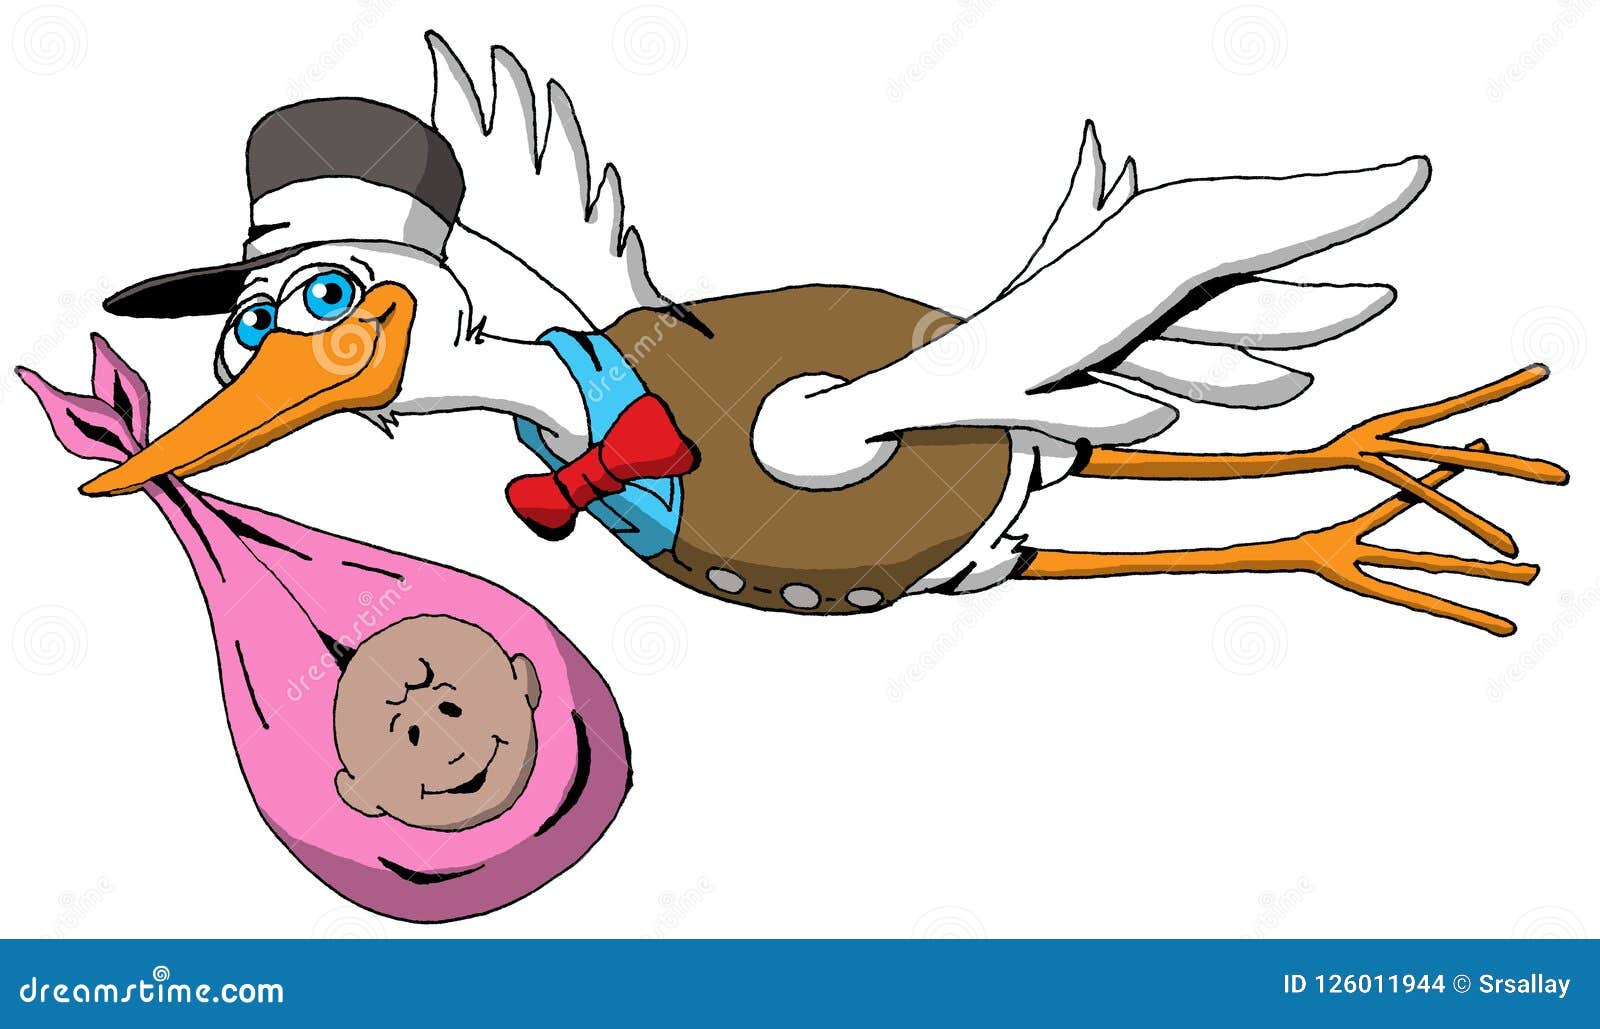 A Very Happy Stork on His Way To Deliver a Baby Stock Vector - Illustration  of clipart, infant: 126011944